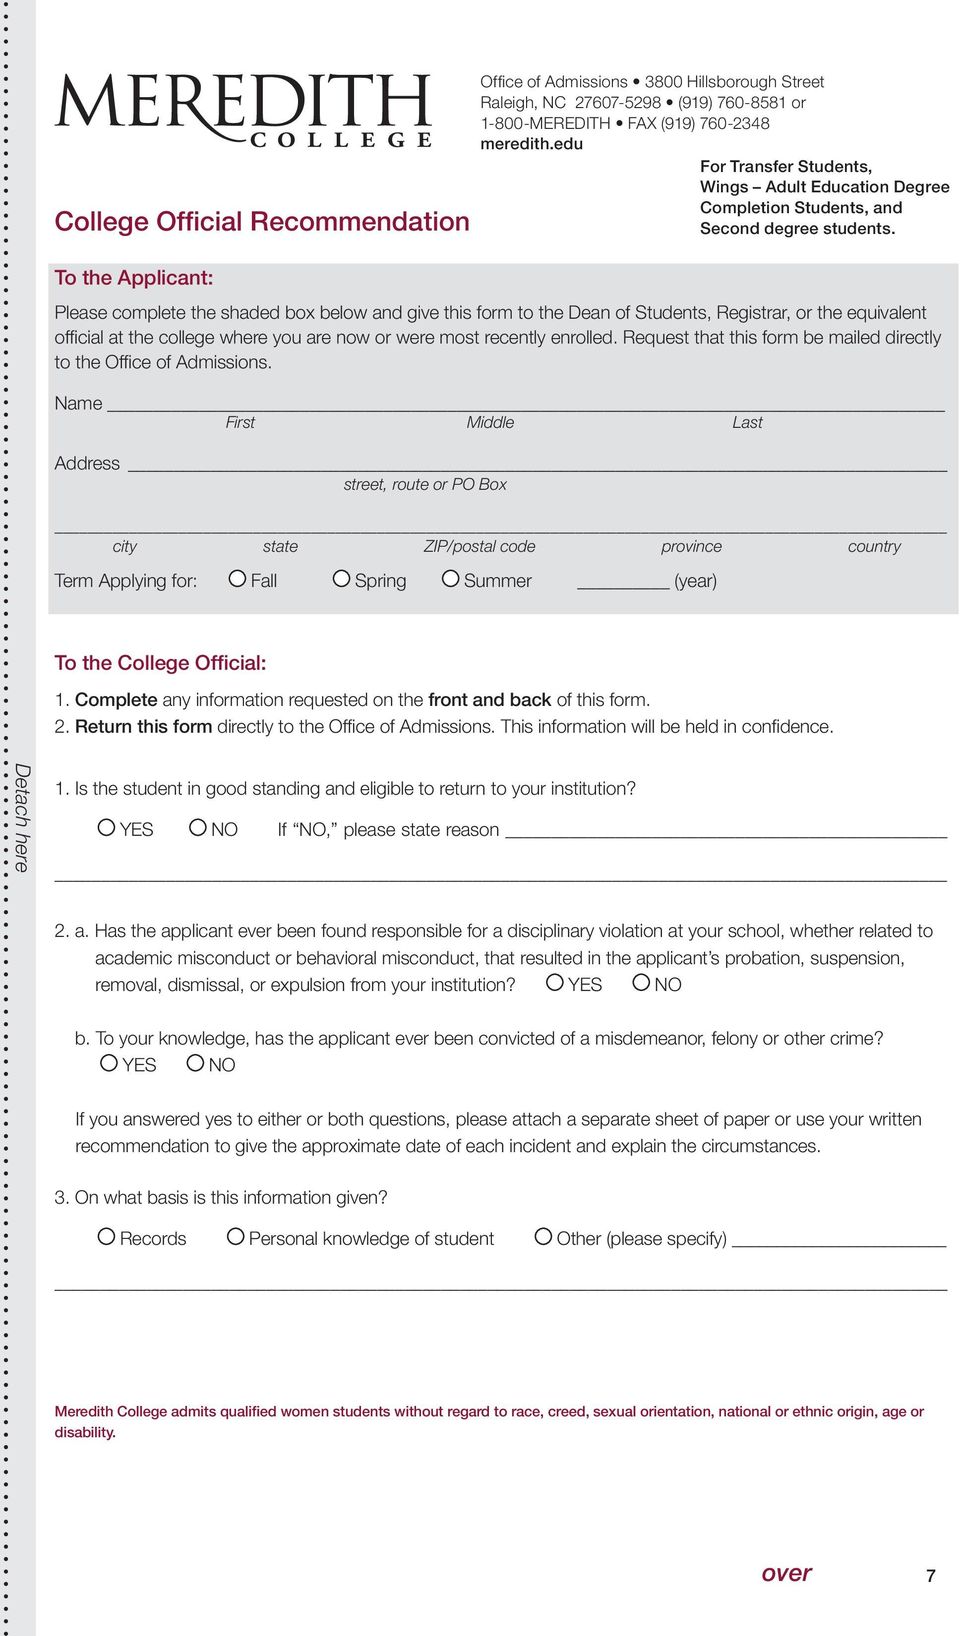 Please complete the shaded box below and give this form to the Dean of Students, Registrar, or the equivalent official at the college where you are now or were most recently enrolled.